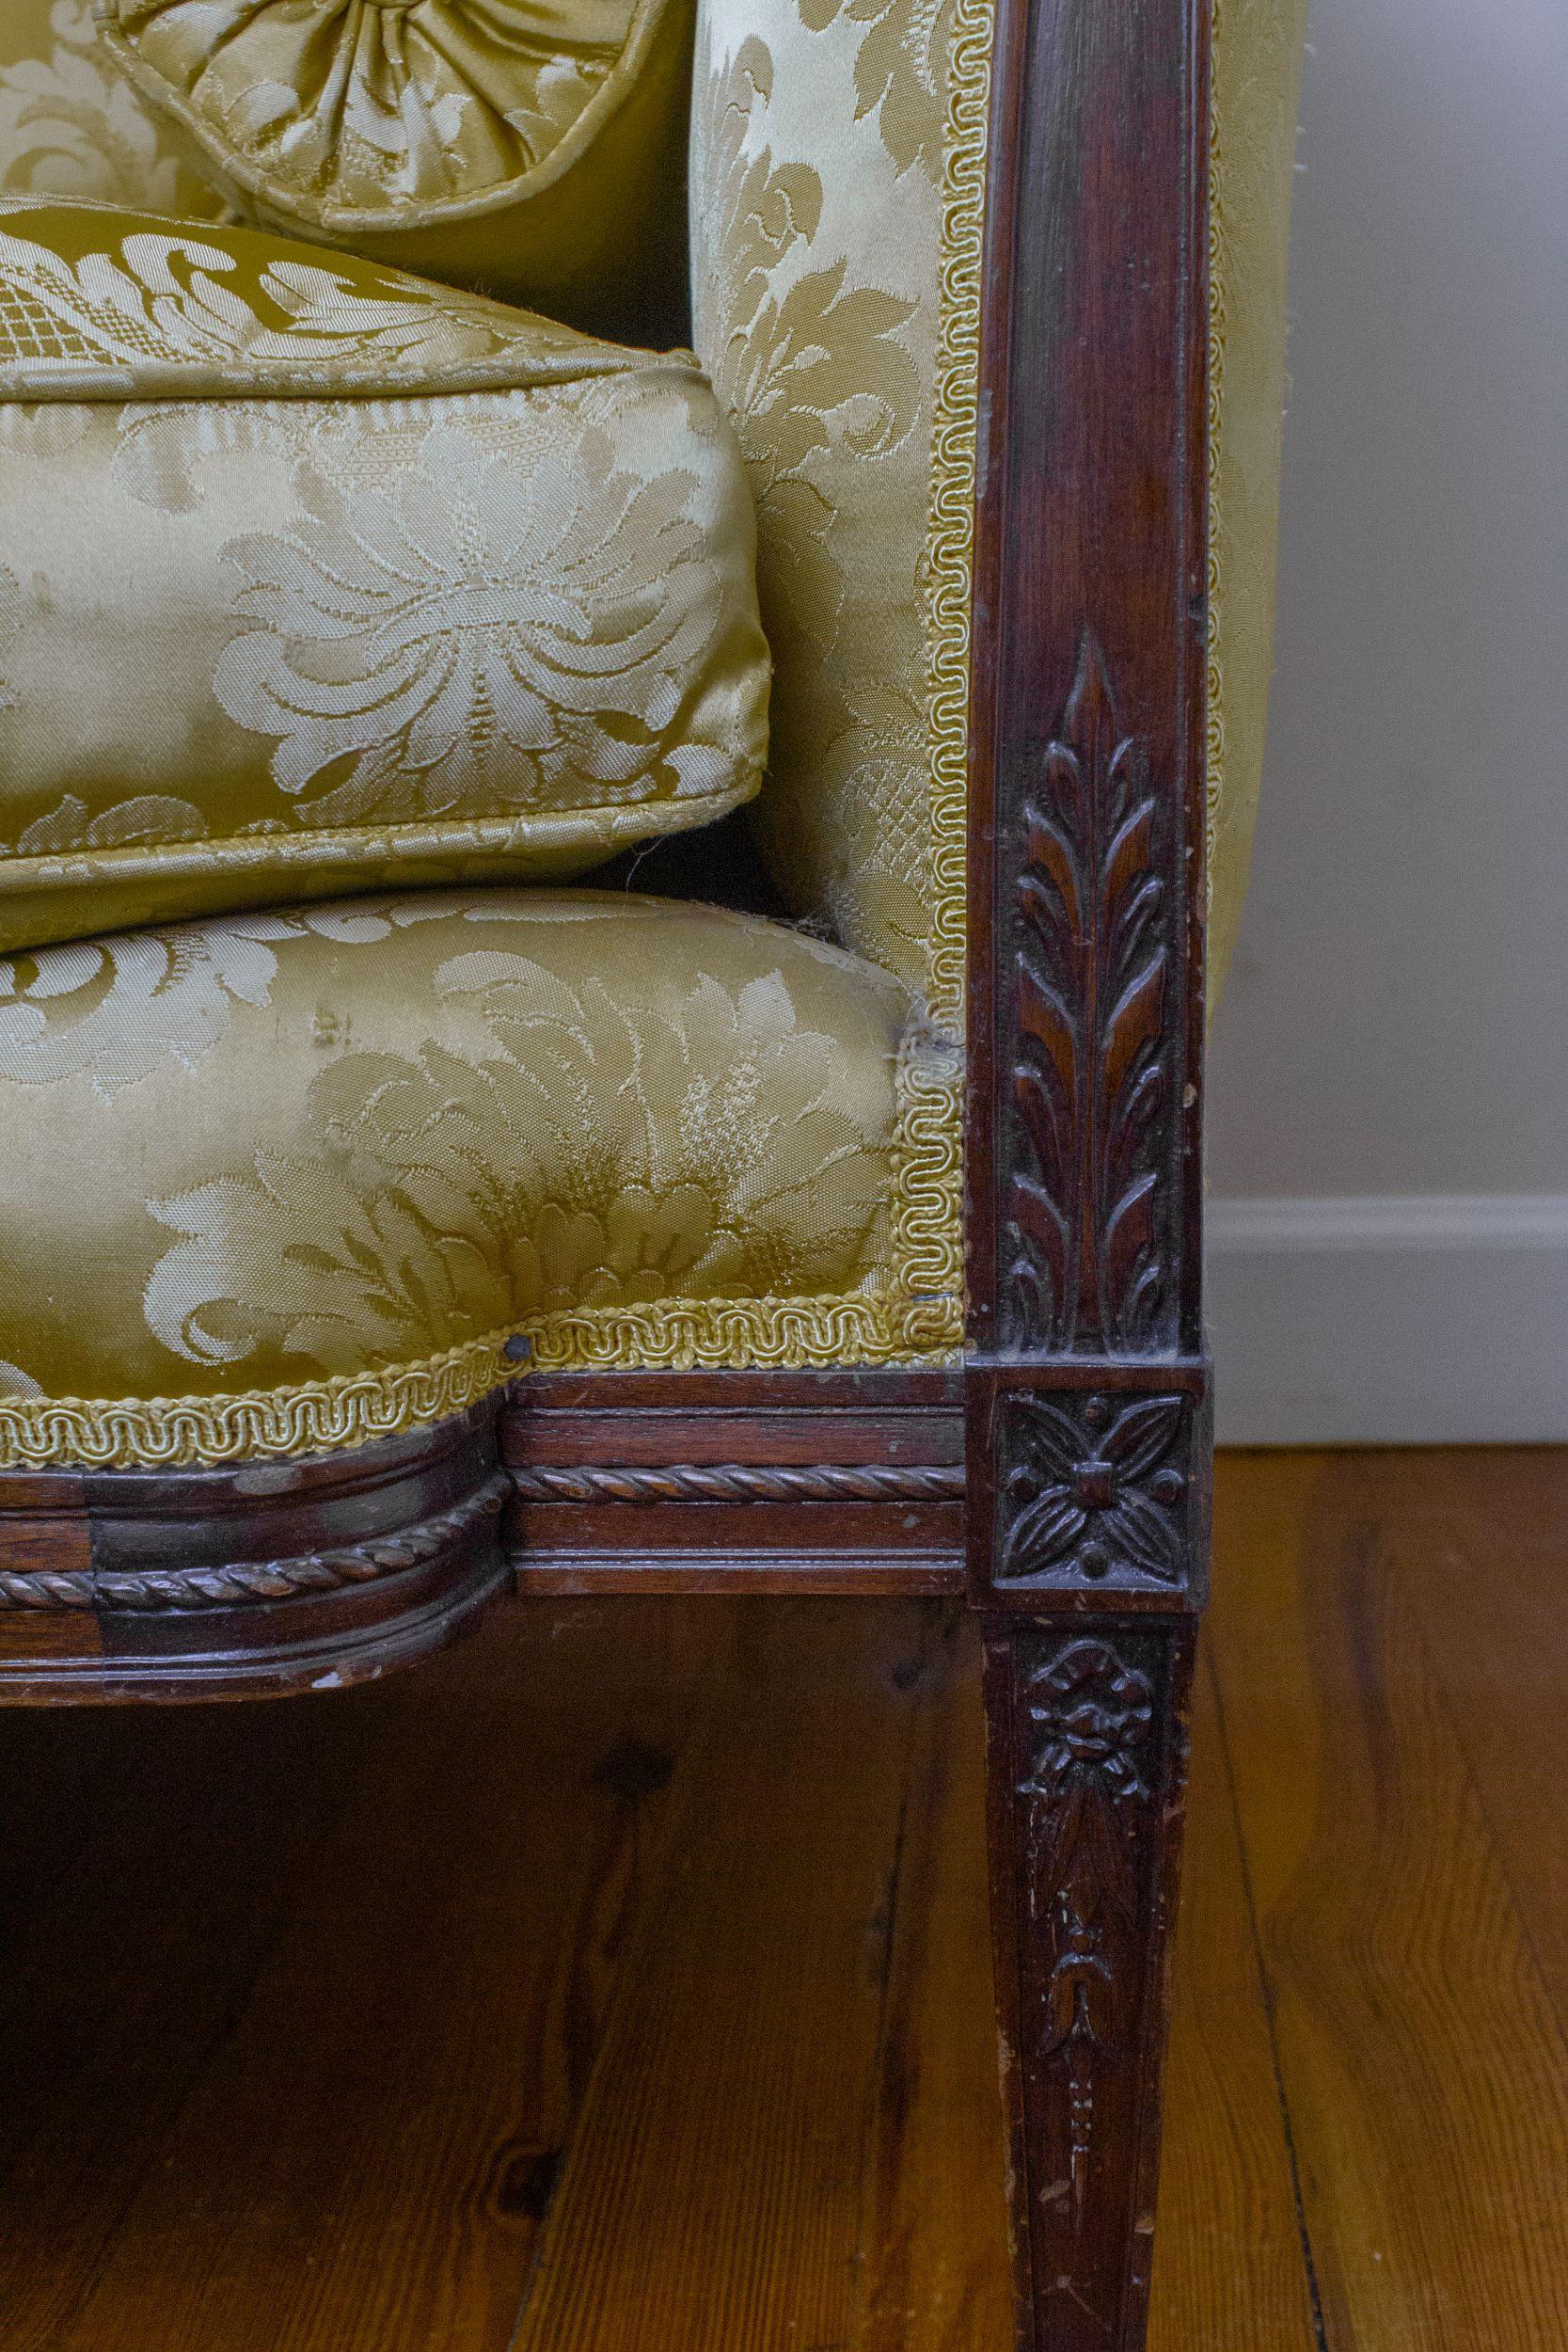 American 19th Century Regency Sofa with Gold Damask Upholstery and Carved Mahogany